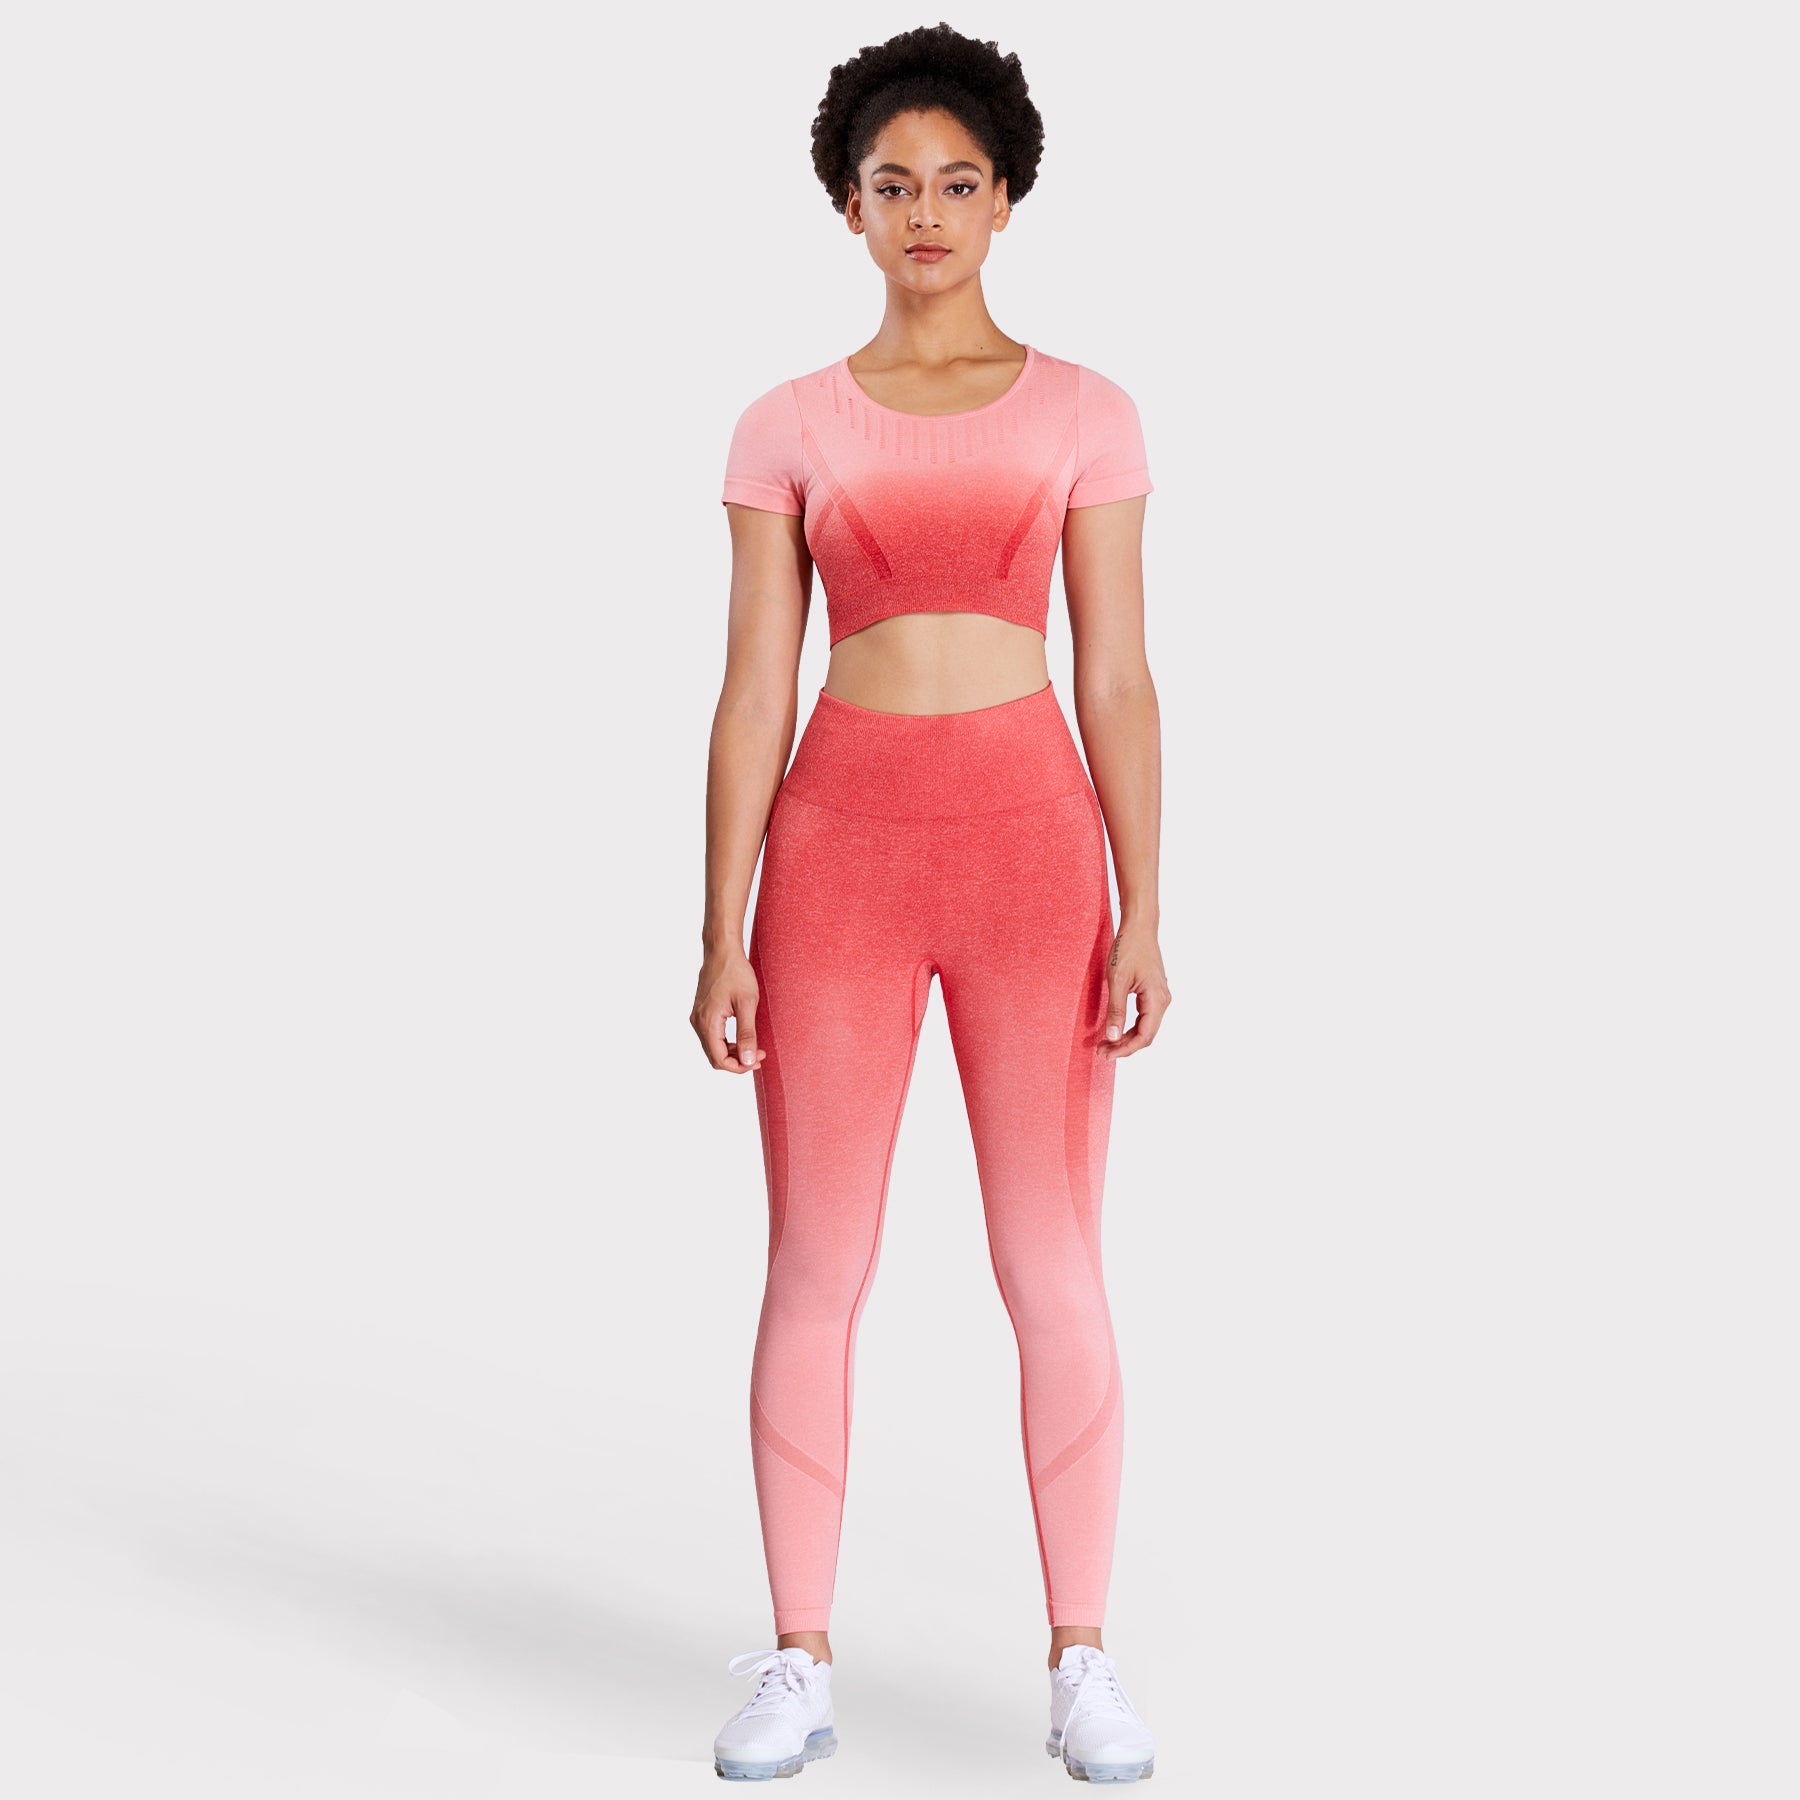 Ombre Seamless High Waisted Leggings & Sports Bra Set Pink or Turquoise